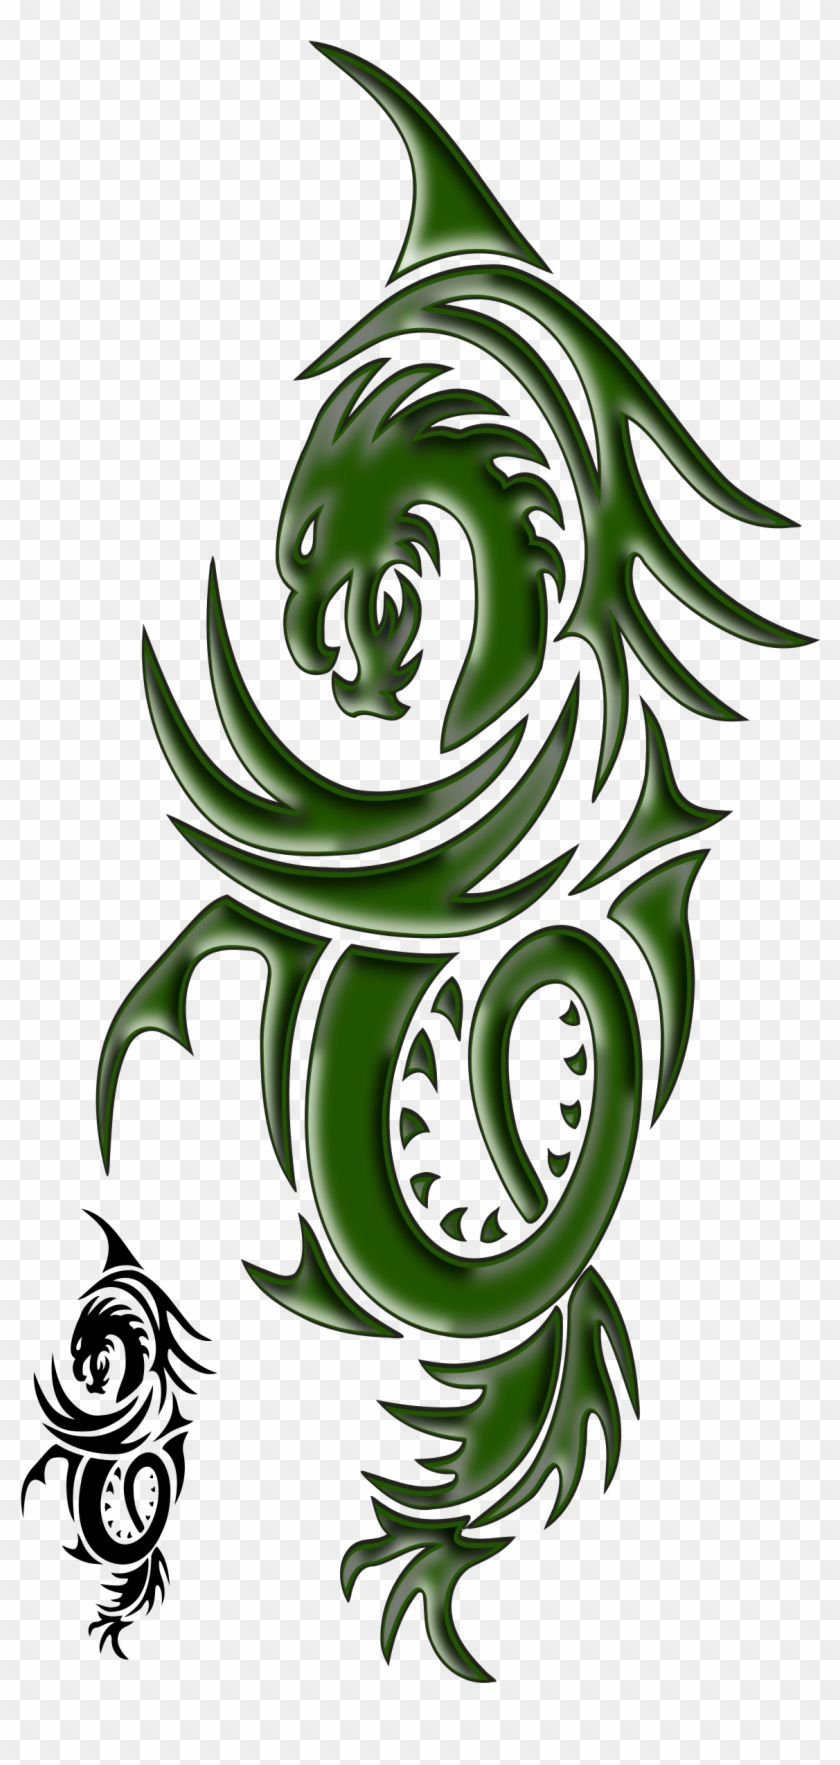 Download Png Image Report - Custom Green Dragon Shower Curtain #399345